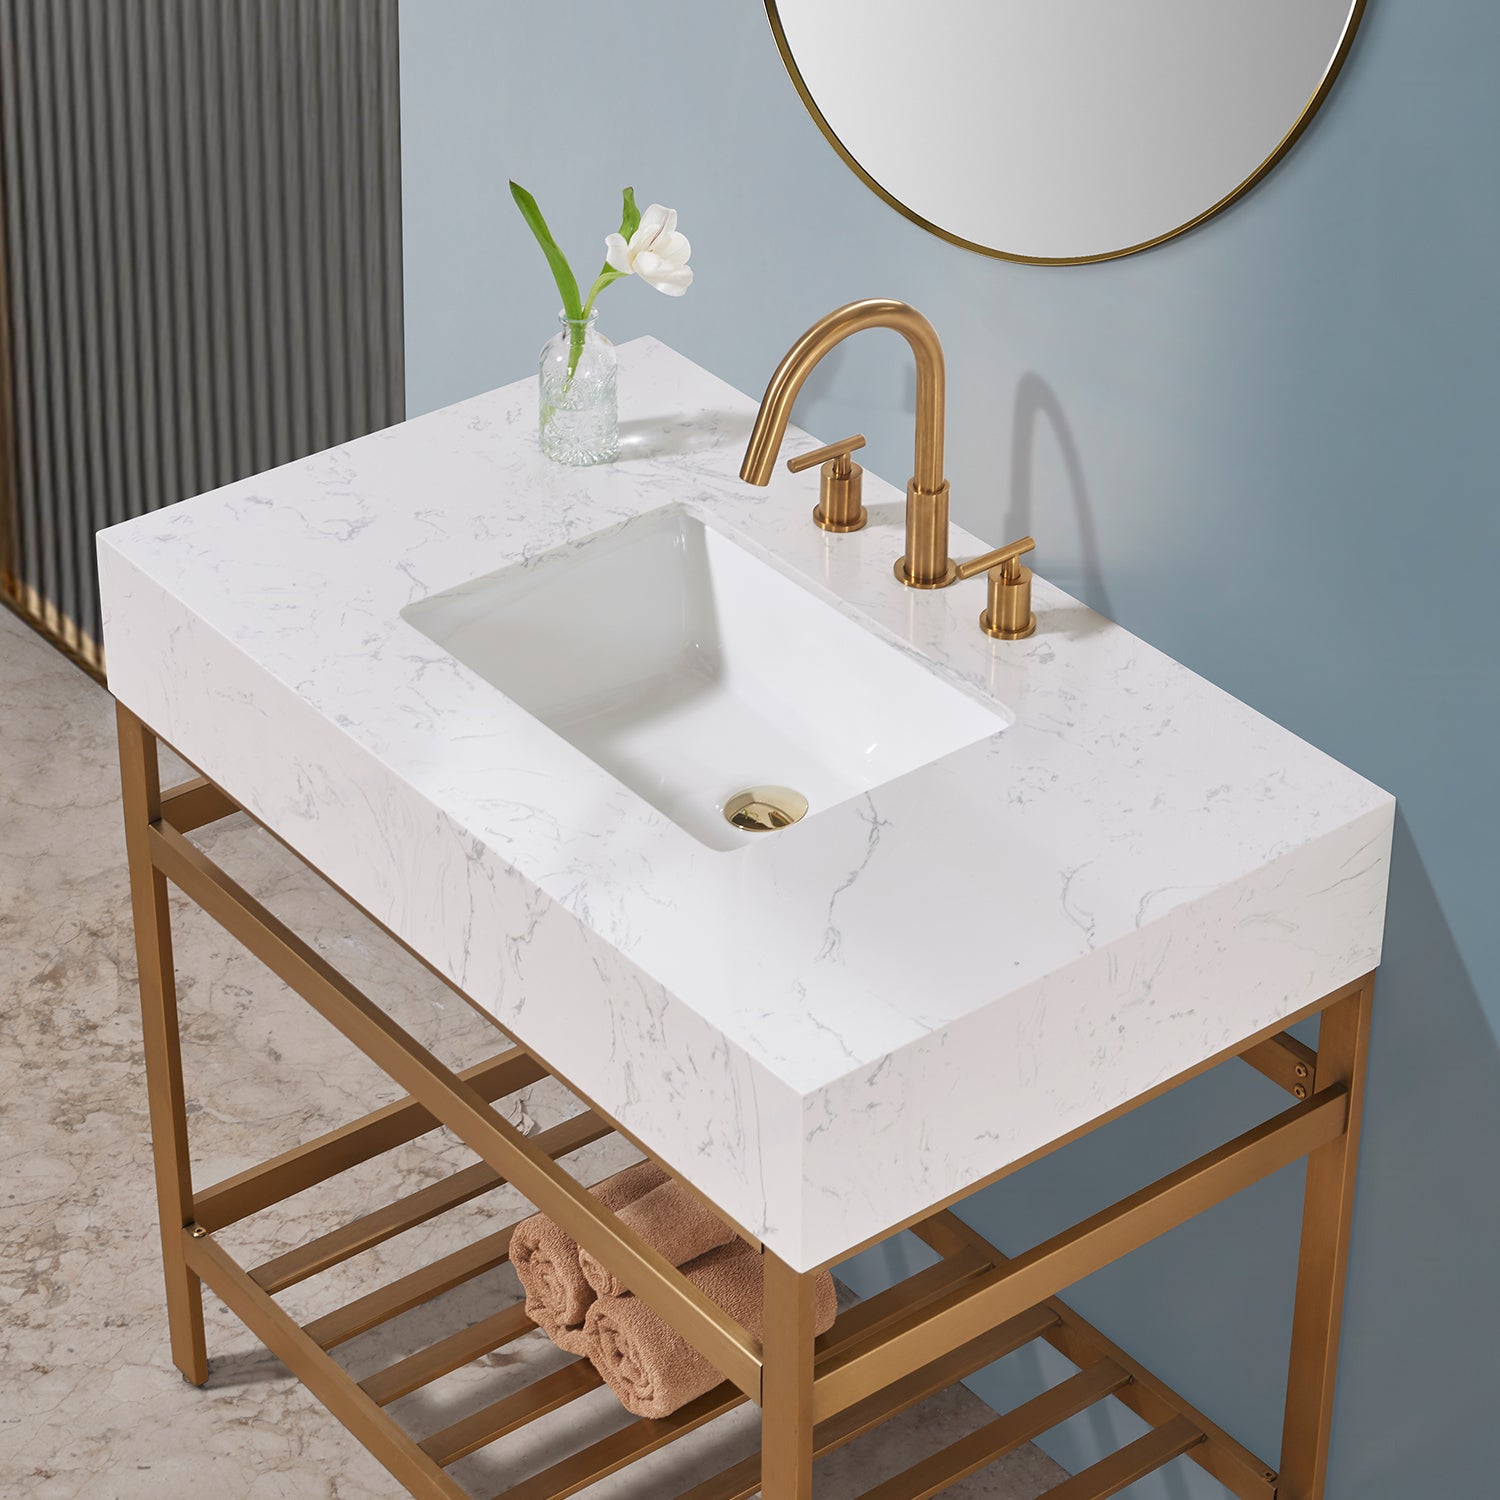 Merano 36" Single Stainless Steel Vanity Console with Aosta White Stone Countertop